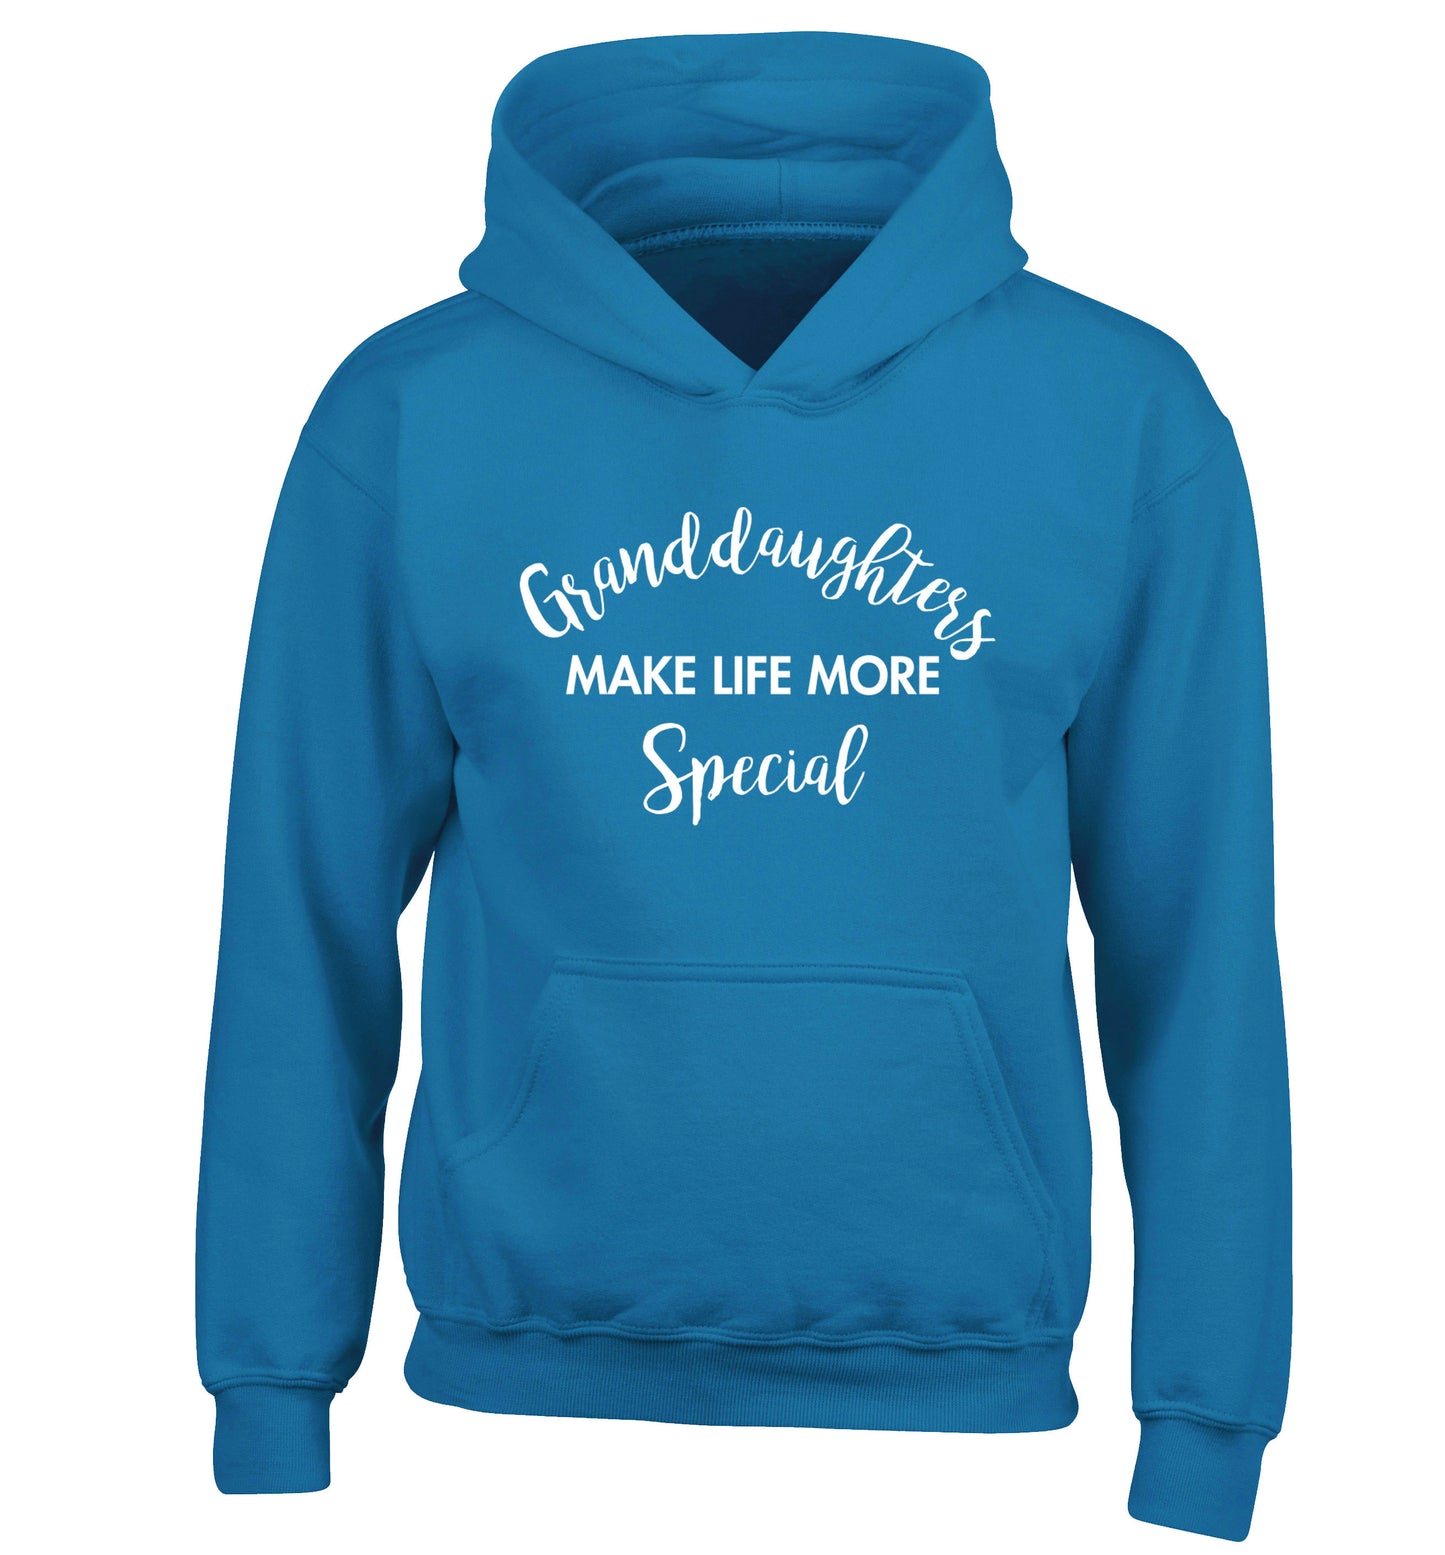 Granddaughters make life more special children's blue hoodie 12-14 Years